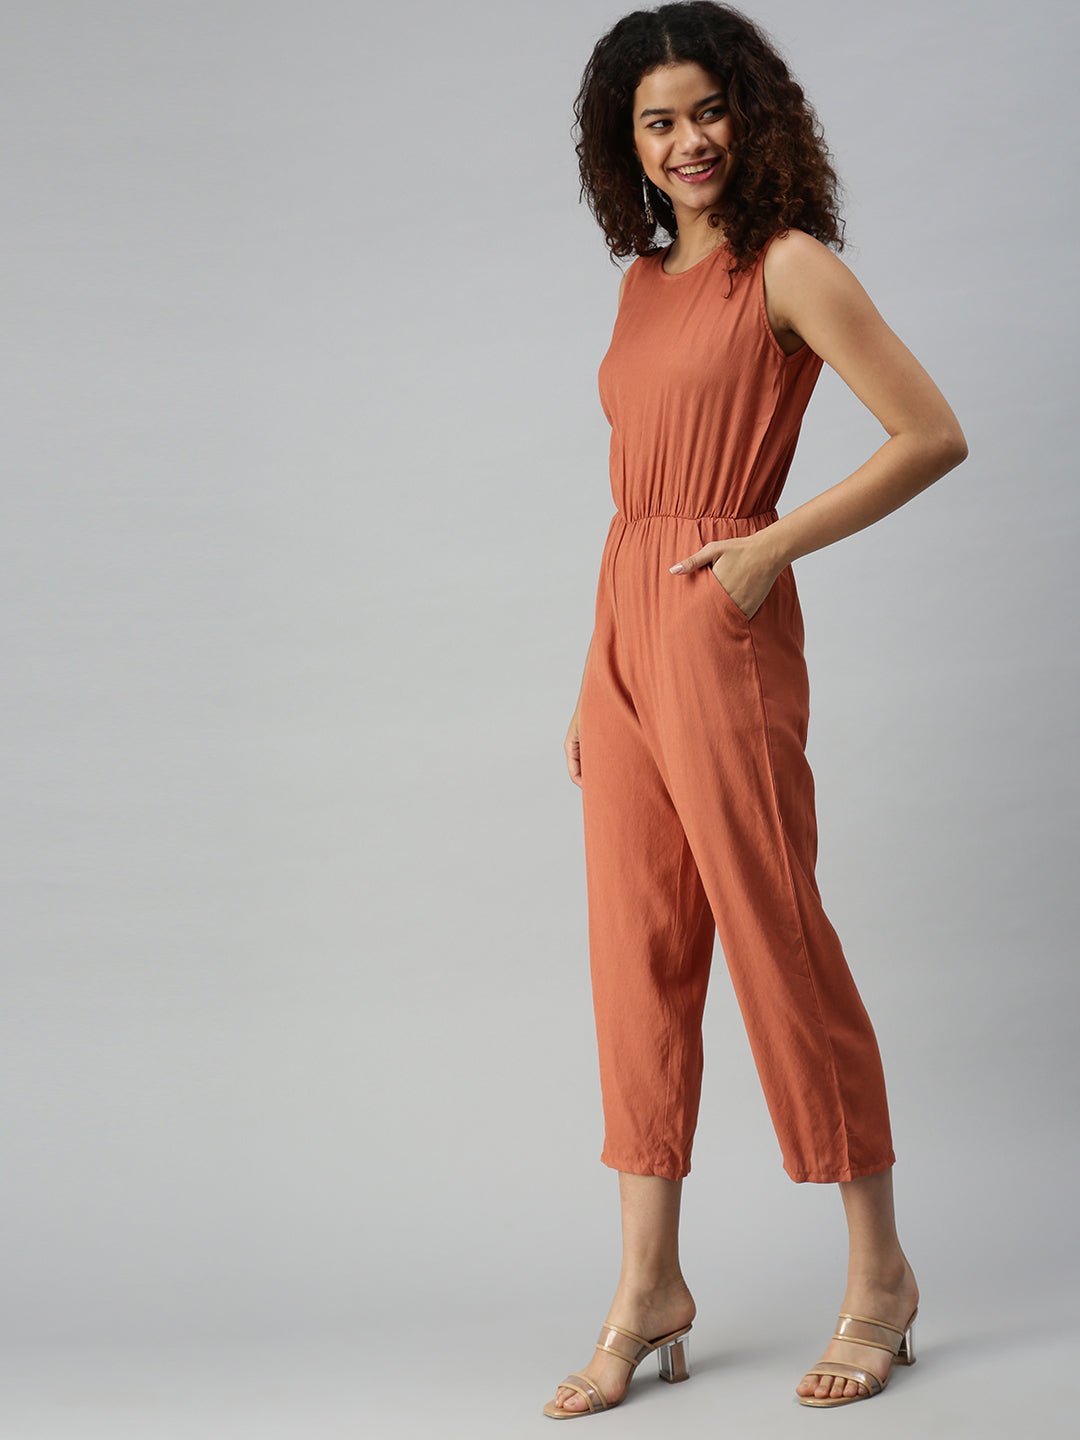 Women's Red Solid Jumpsuit